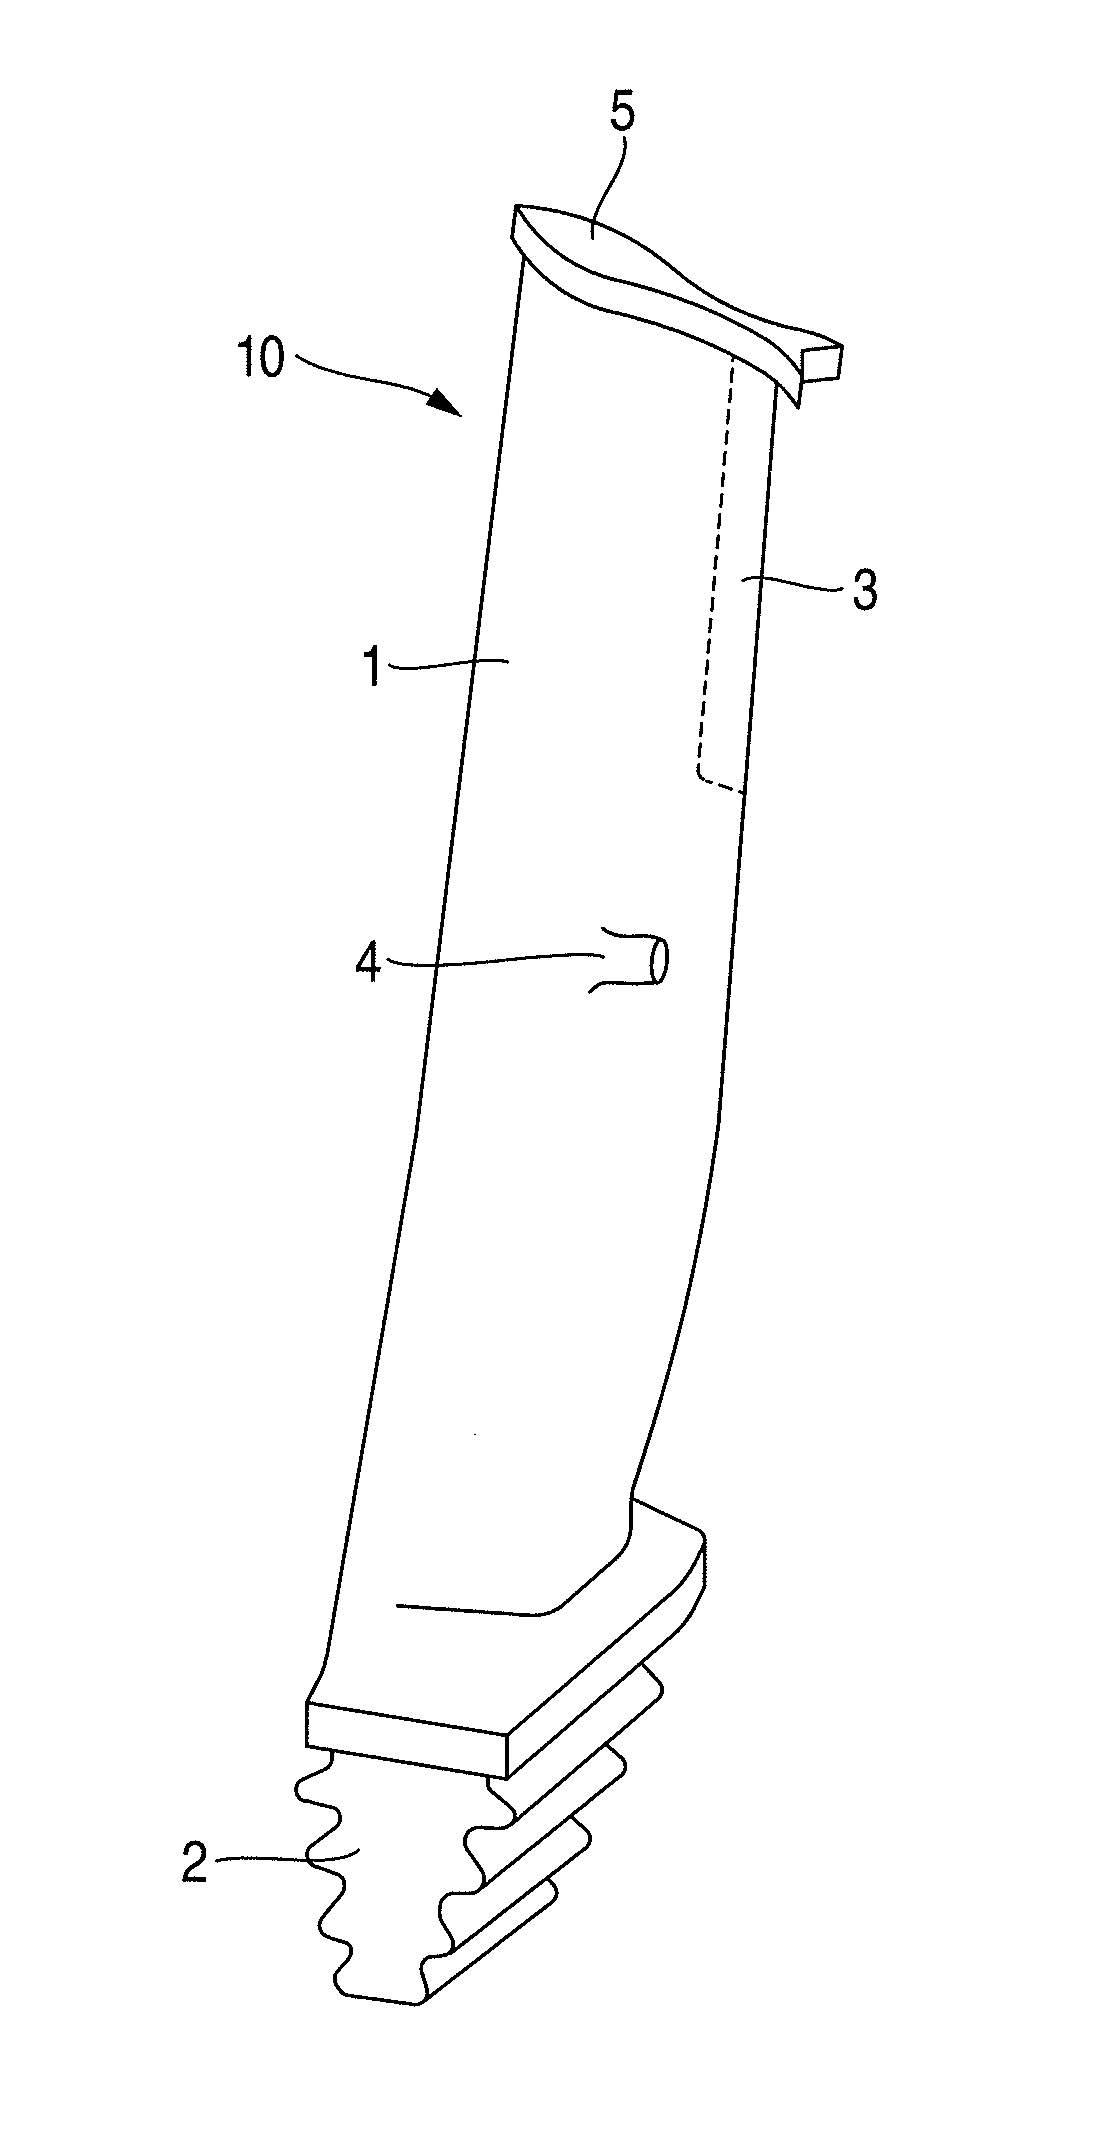 Precipitation Hardening Martensitic Stainless Steel and Long Blade for Steam Turbine Using the Same